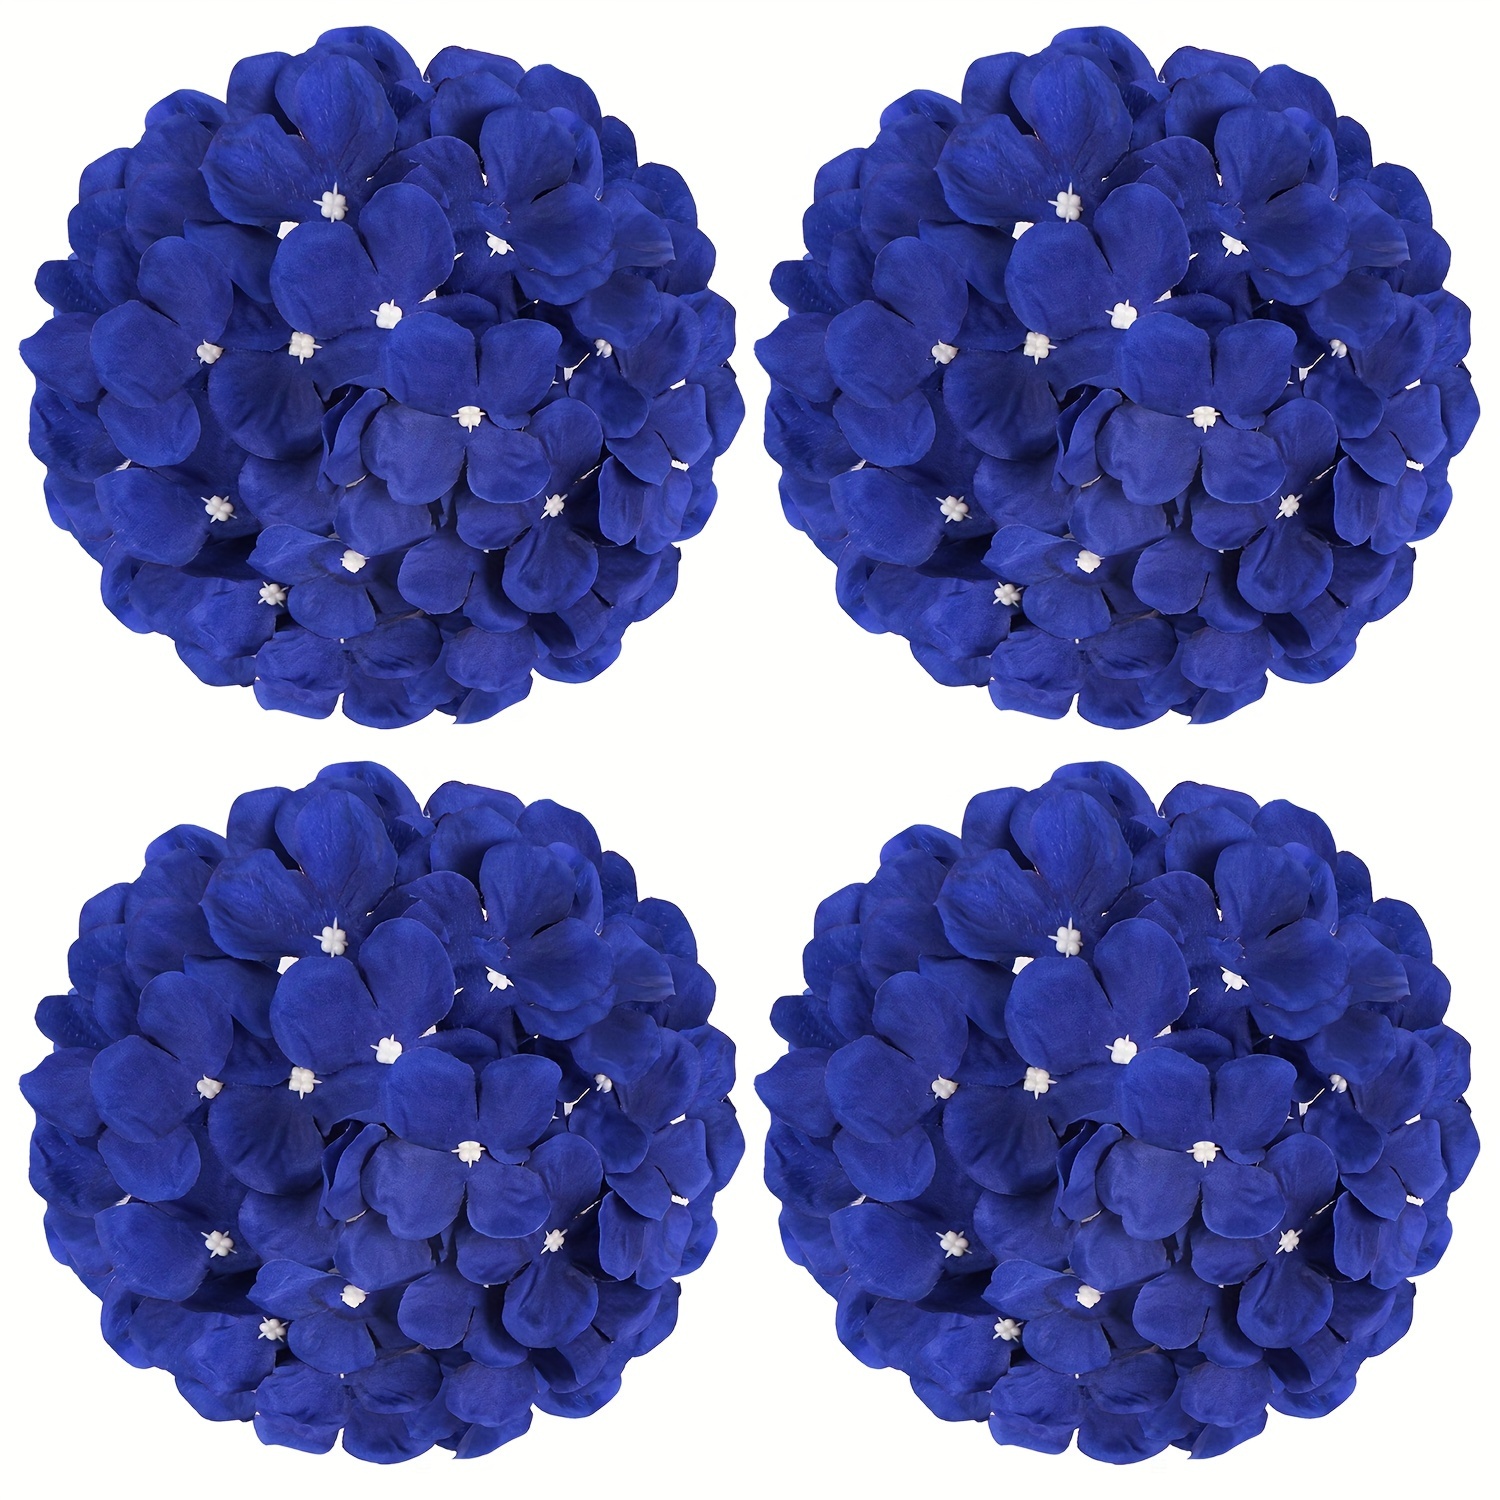 

Wedding And Engagement Decor - 4pcs Artificial Hydrangea Flowers With Stems, Polyester Silk Fake Flower Heads For Home Party Floral Arrangements - Navy Blue